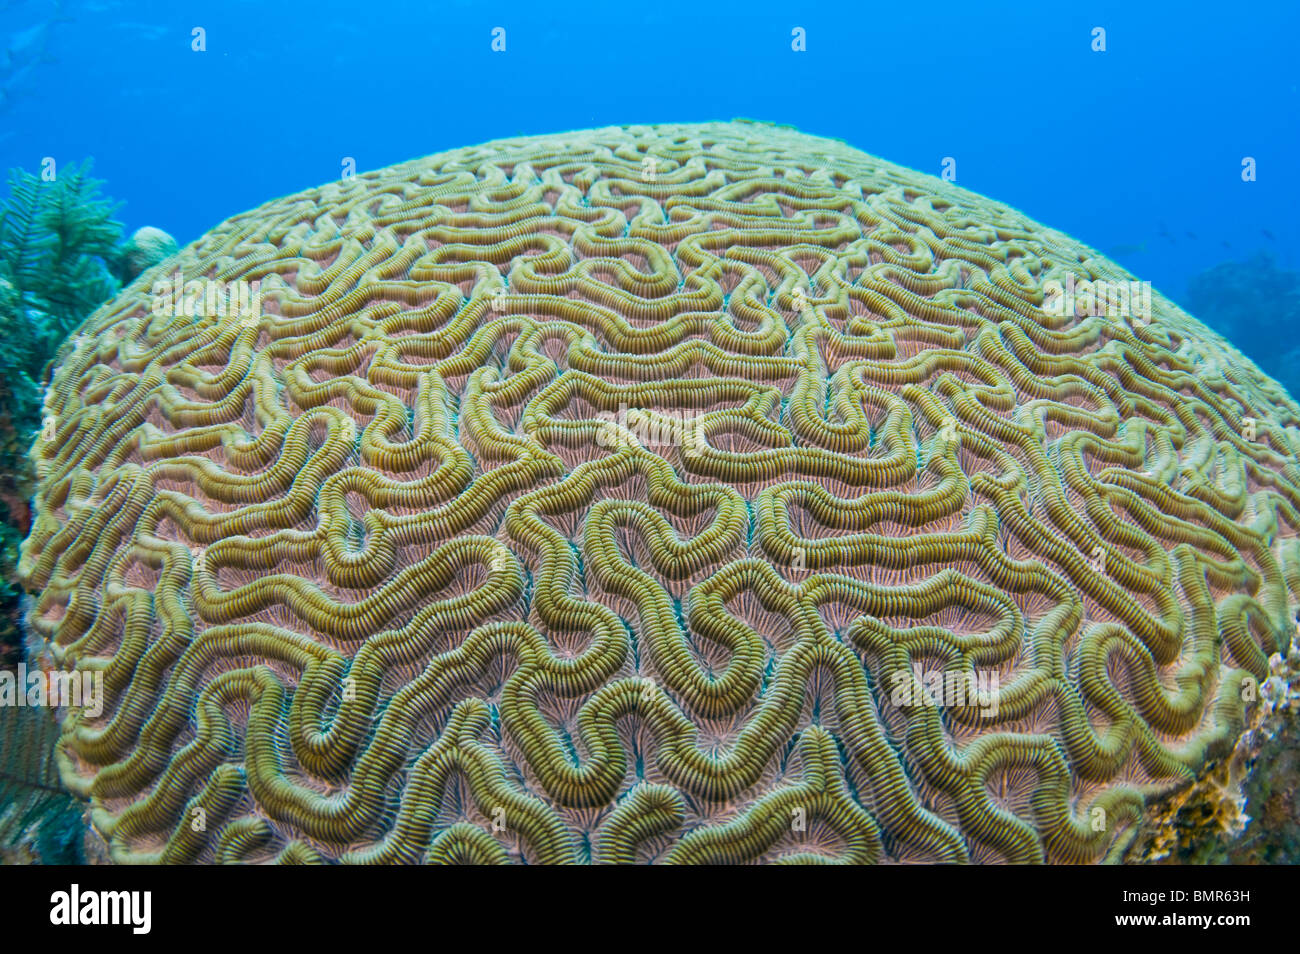 Brain Coral (Diploria sp.) in the barrier reef in Belize, Central America, Caribbean Sea Stock Photo